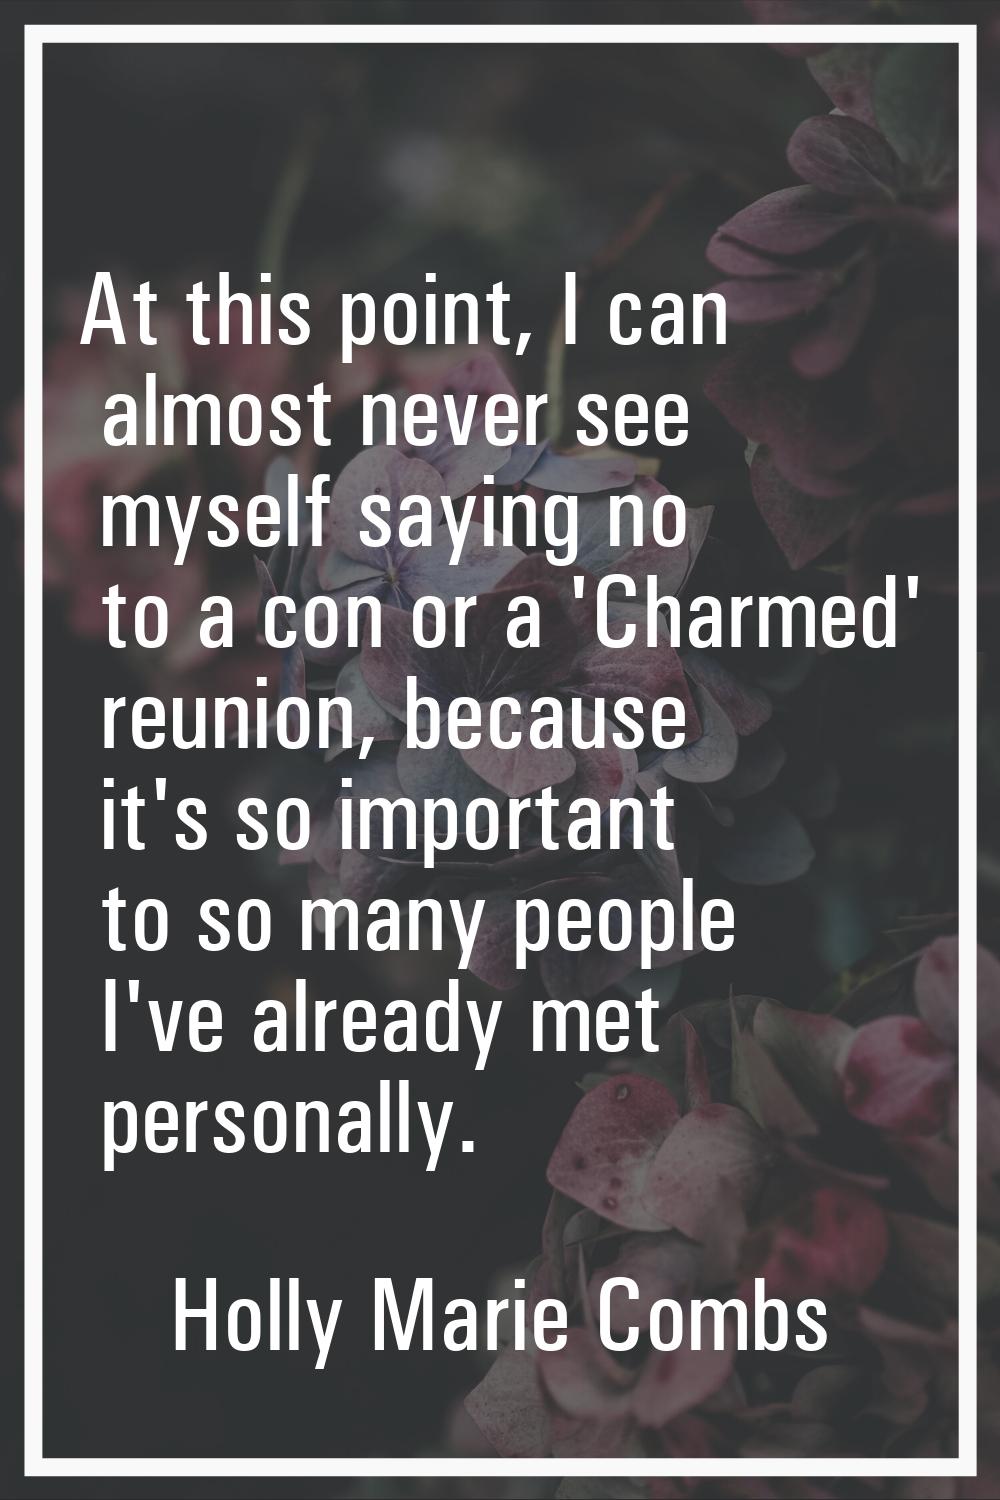 At this point, I can almost never see myself saying no to a con or a 'Charmed' reunion, because it'